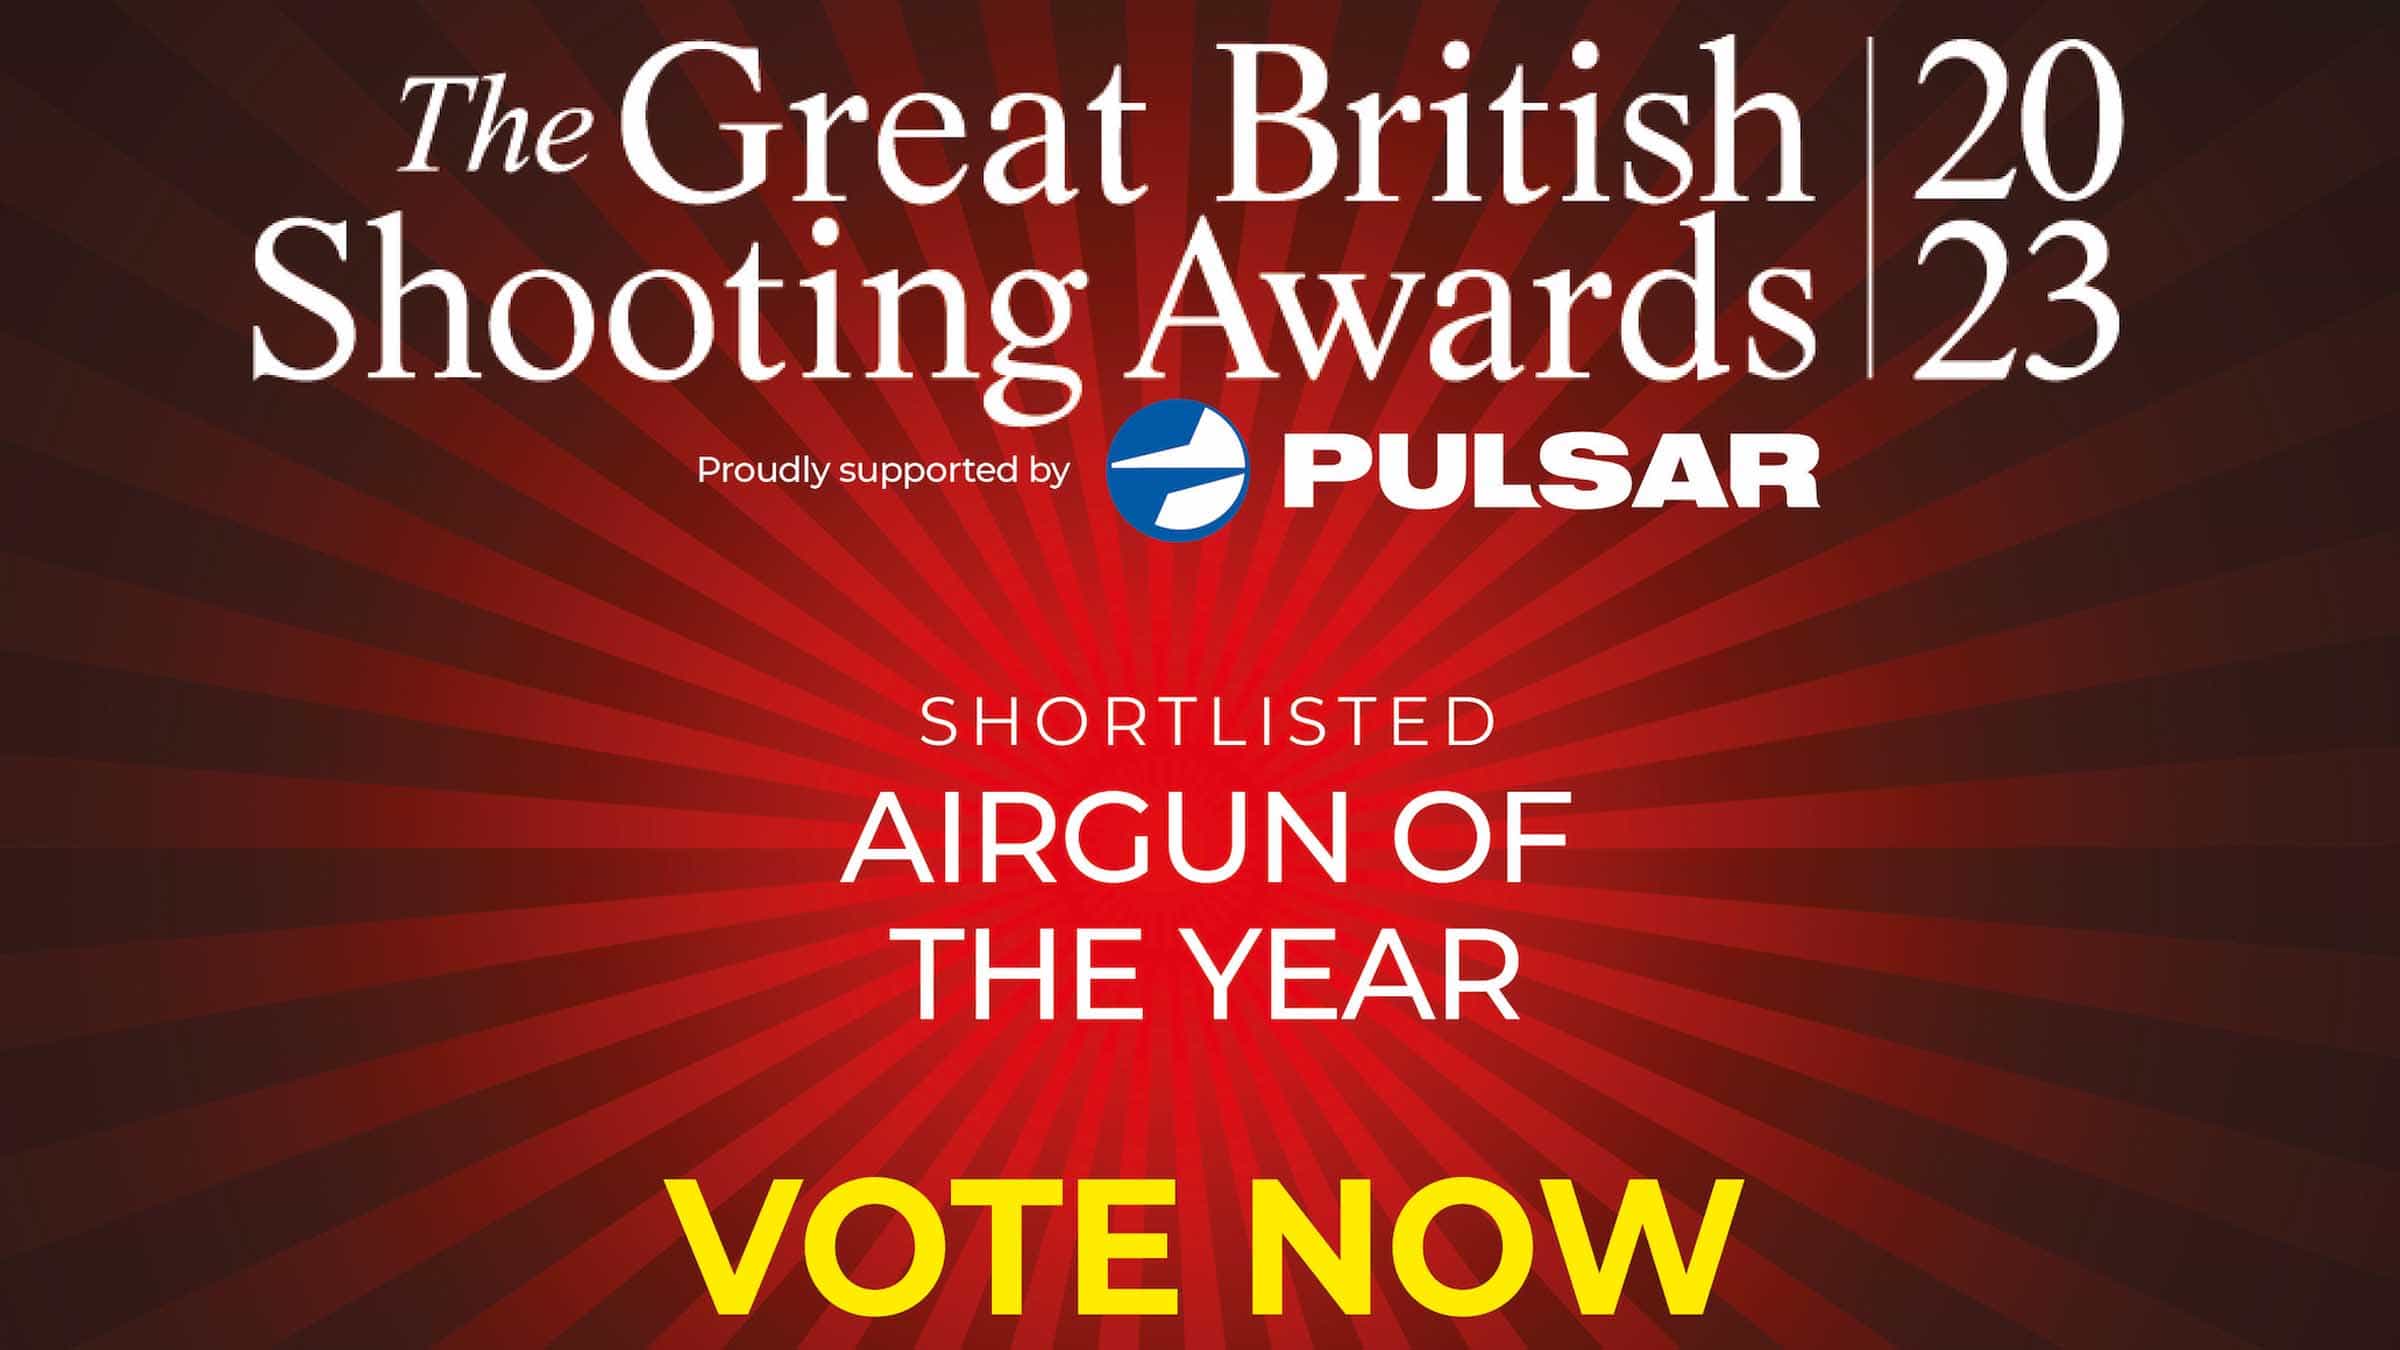 Vote for the S510T for Airgun of the Year!